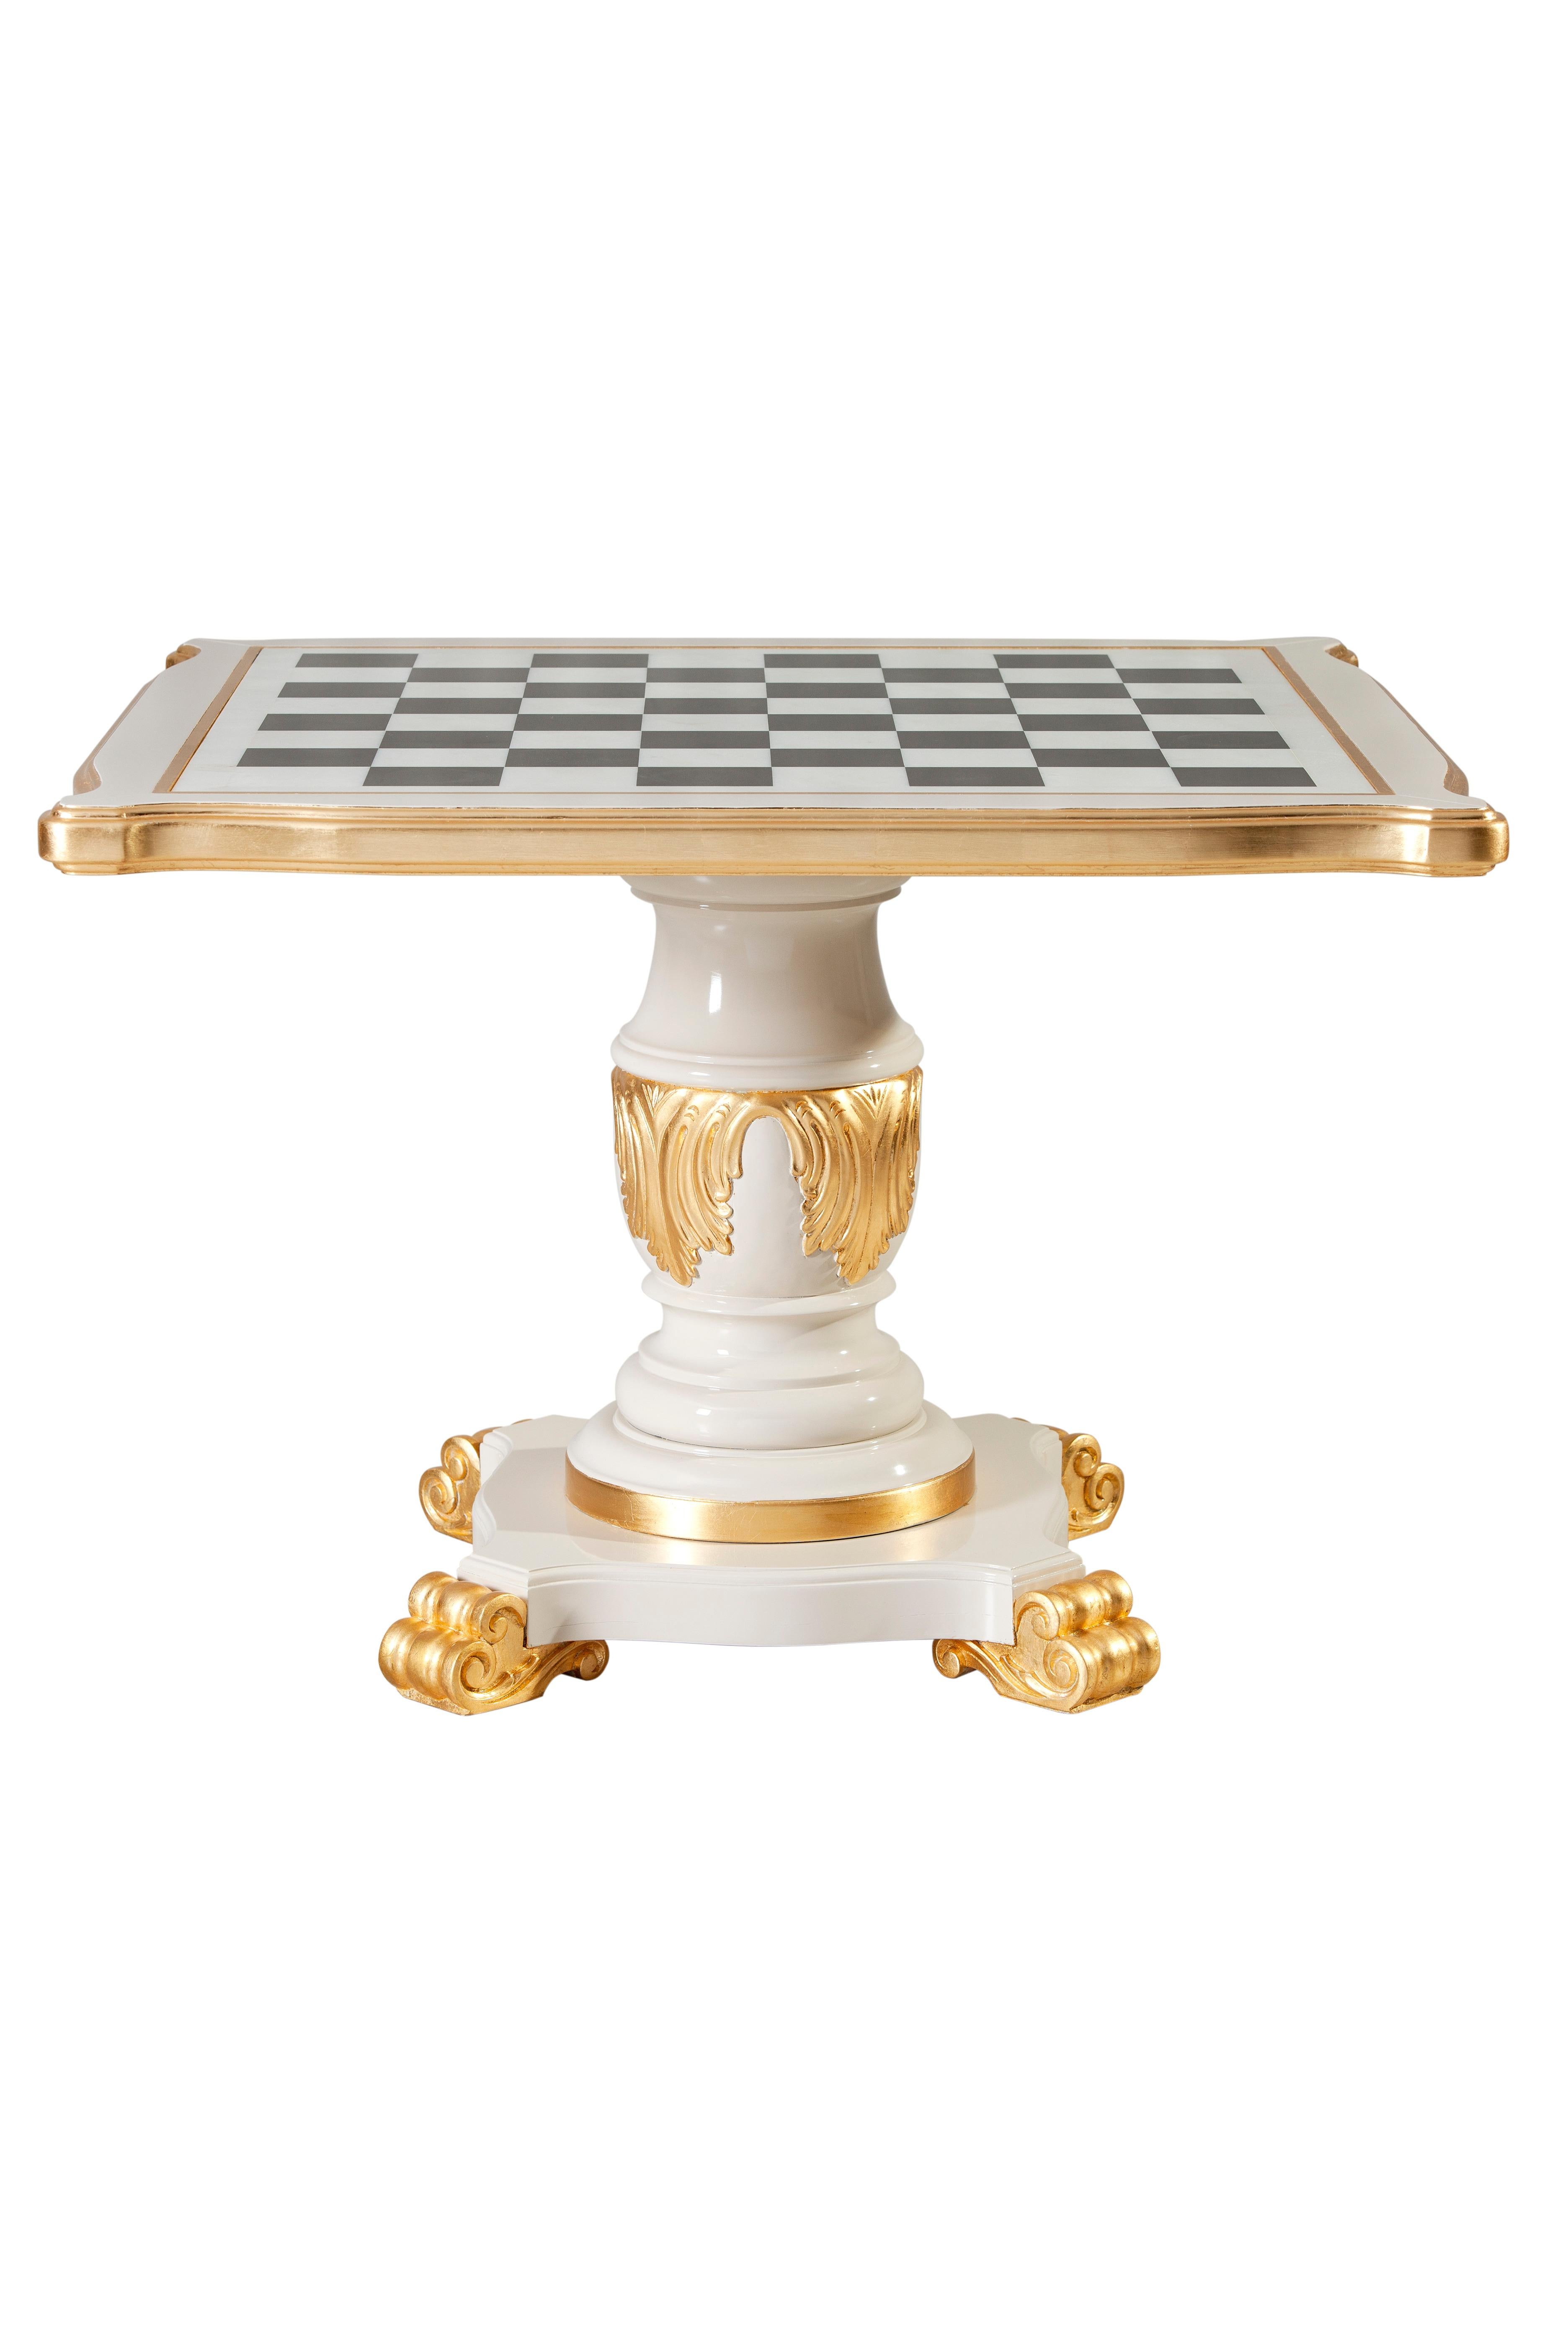 Evelyn chess game set, Lusitanus Home Collection, handcrafted in Portugal - Europe by Lusitanus Home.

A French Neoclassical style chess game set, Evelyn is hand carved in linden wood.

The luxurious Evelyn chess set is designed for the most